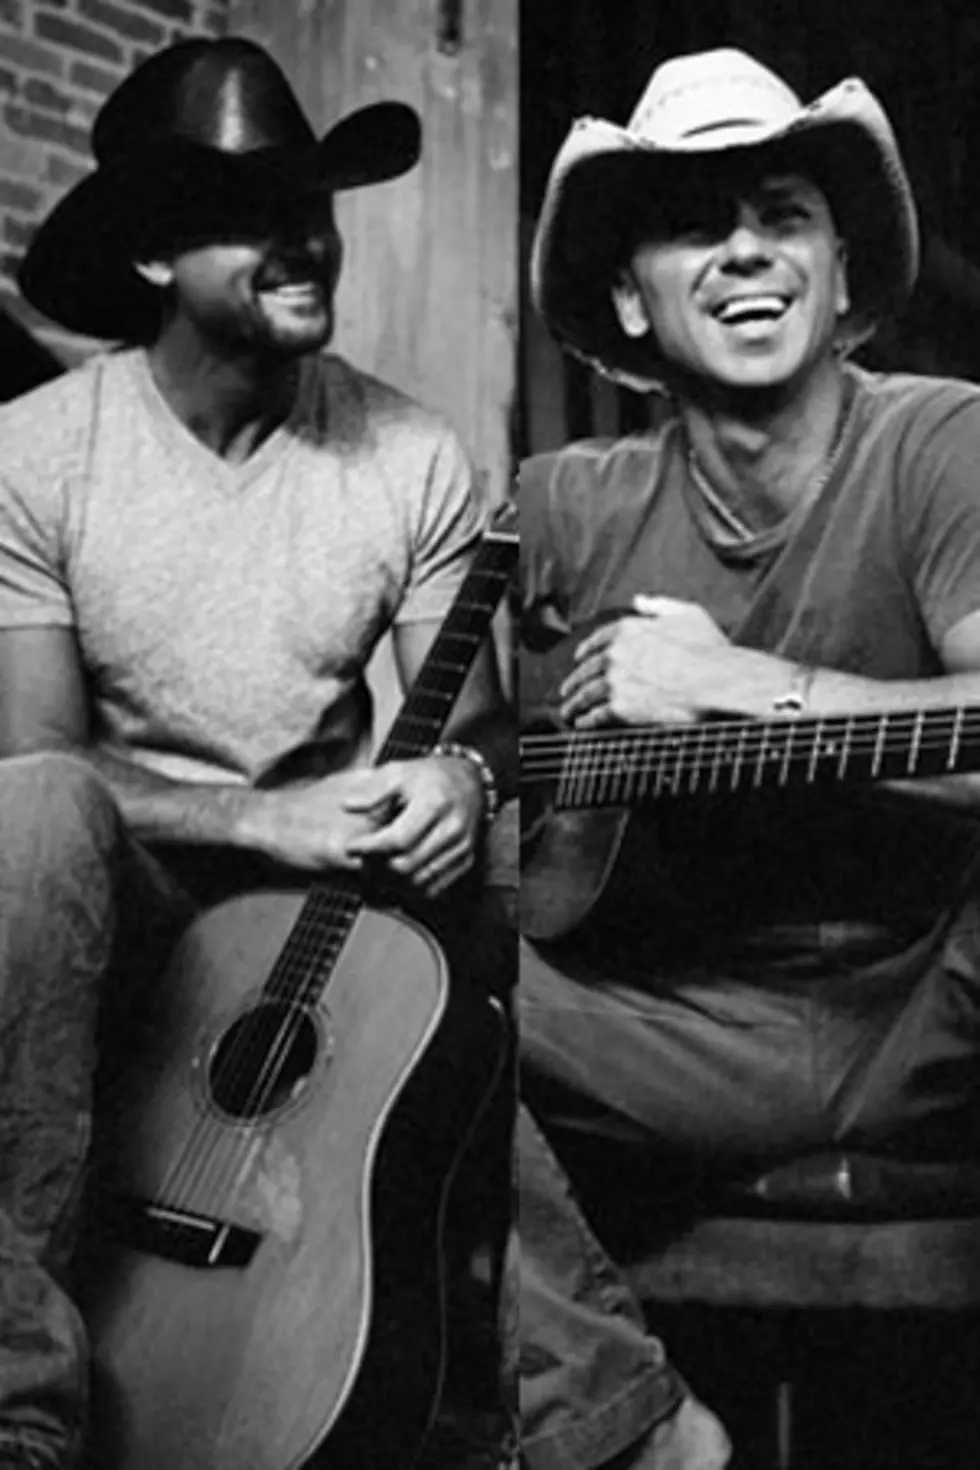 Top 10 News Stories of 2011: Kenny Chesney and Tim McGraw Announce 2012 Tour